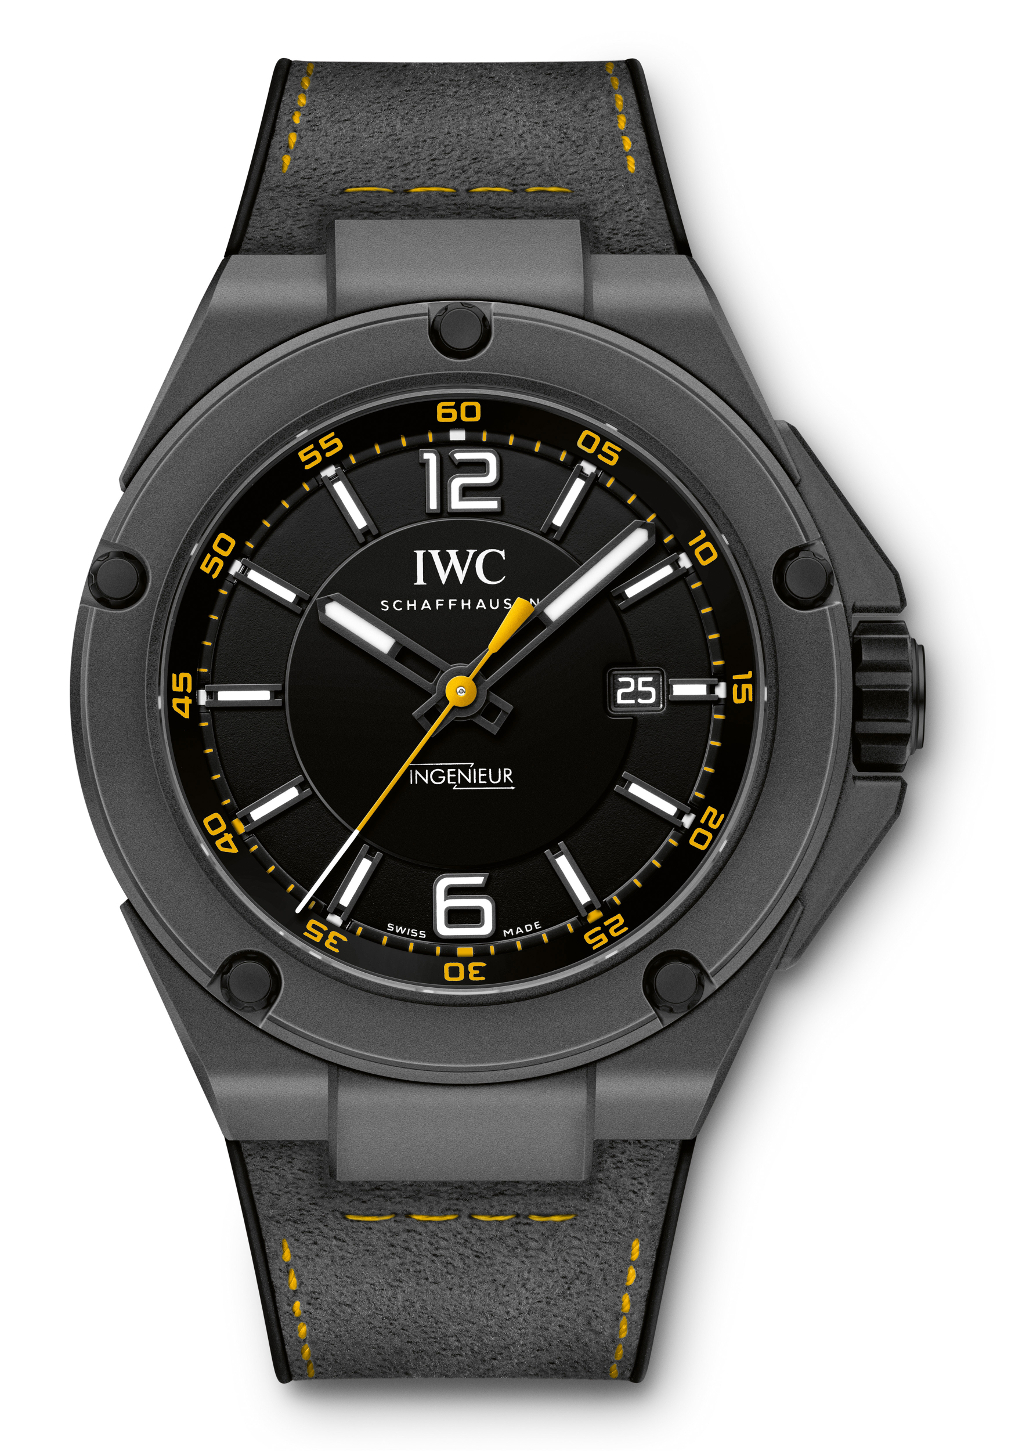 01_IWC_Ingenieur_Automatic_Edition_AMG_GT_Ref_IW324602_front